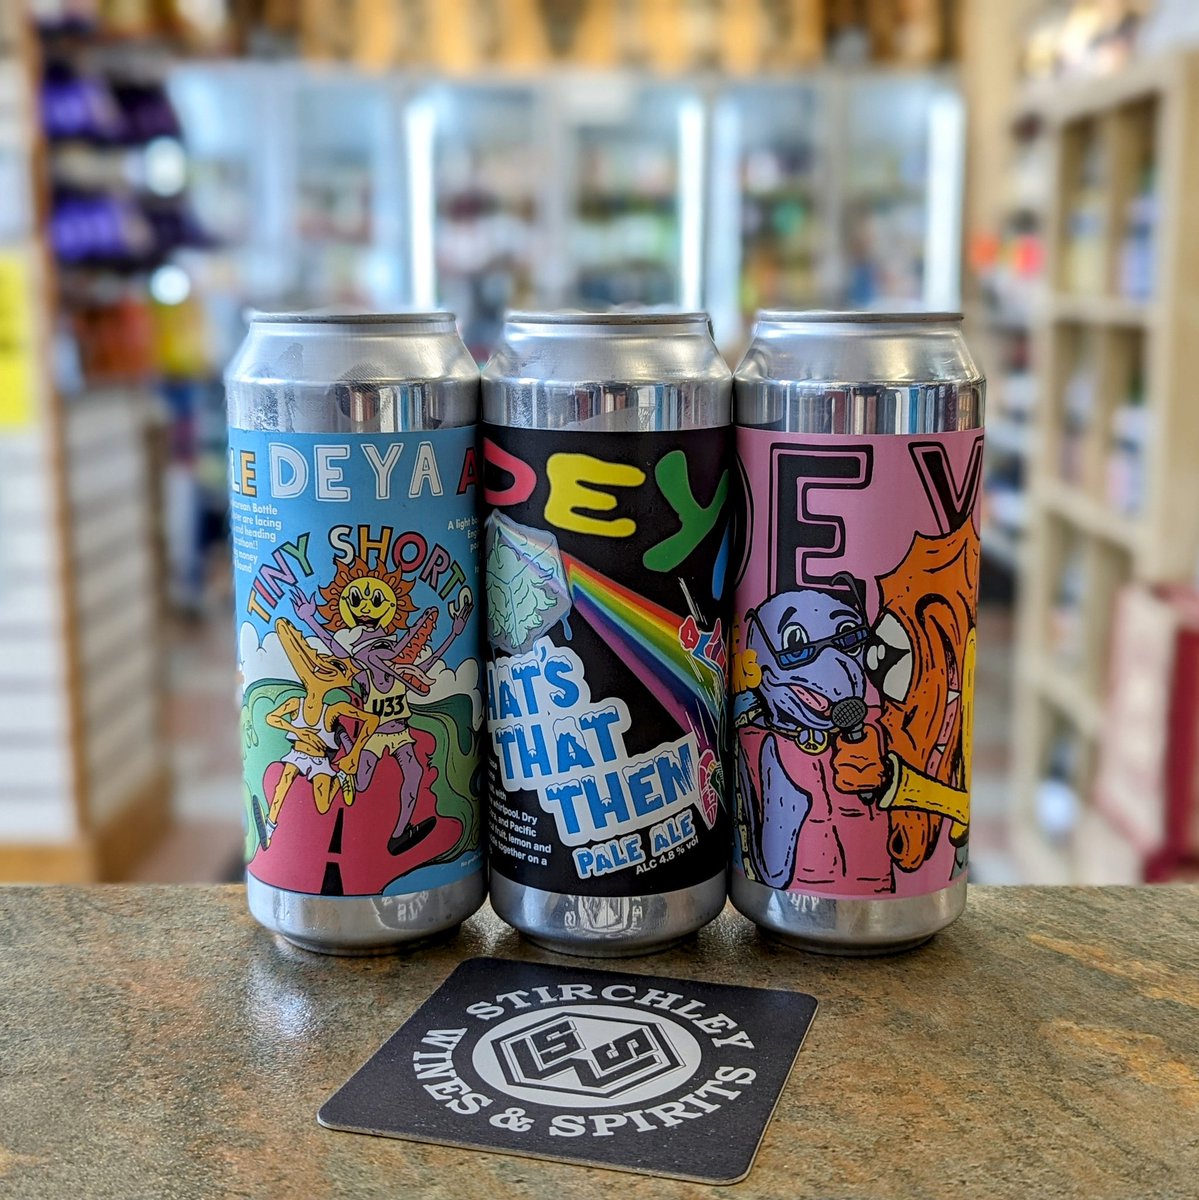 Introducing 3 new beers from a brewery who needs no introduction.... 🍺 Tiny Shorts 3.4% Pale Ale 🍺 That's That Then 4.8% Pale Ale 🍺 No Self Noms 5% Pale Ale #NewBeer #VivaStirchley #VivaBrum #ShopIndependent *(they're from @deyabrewery if you don't know!)